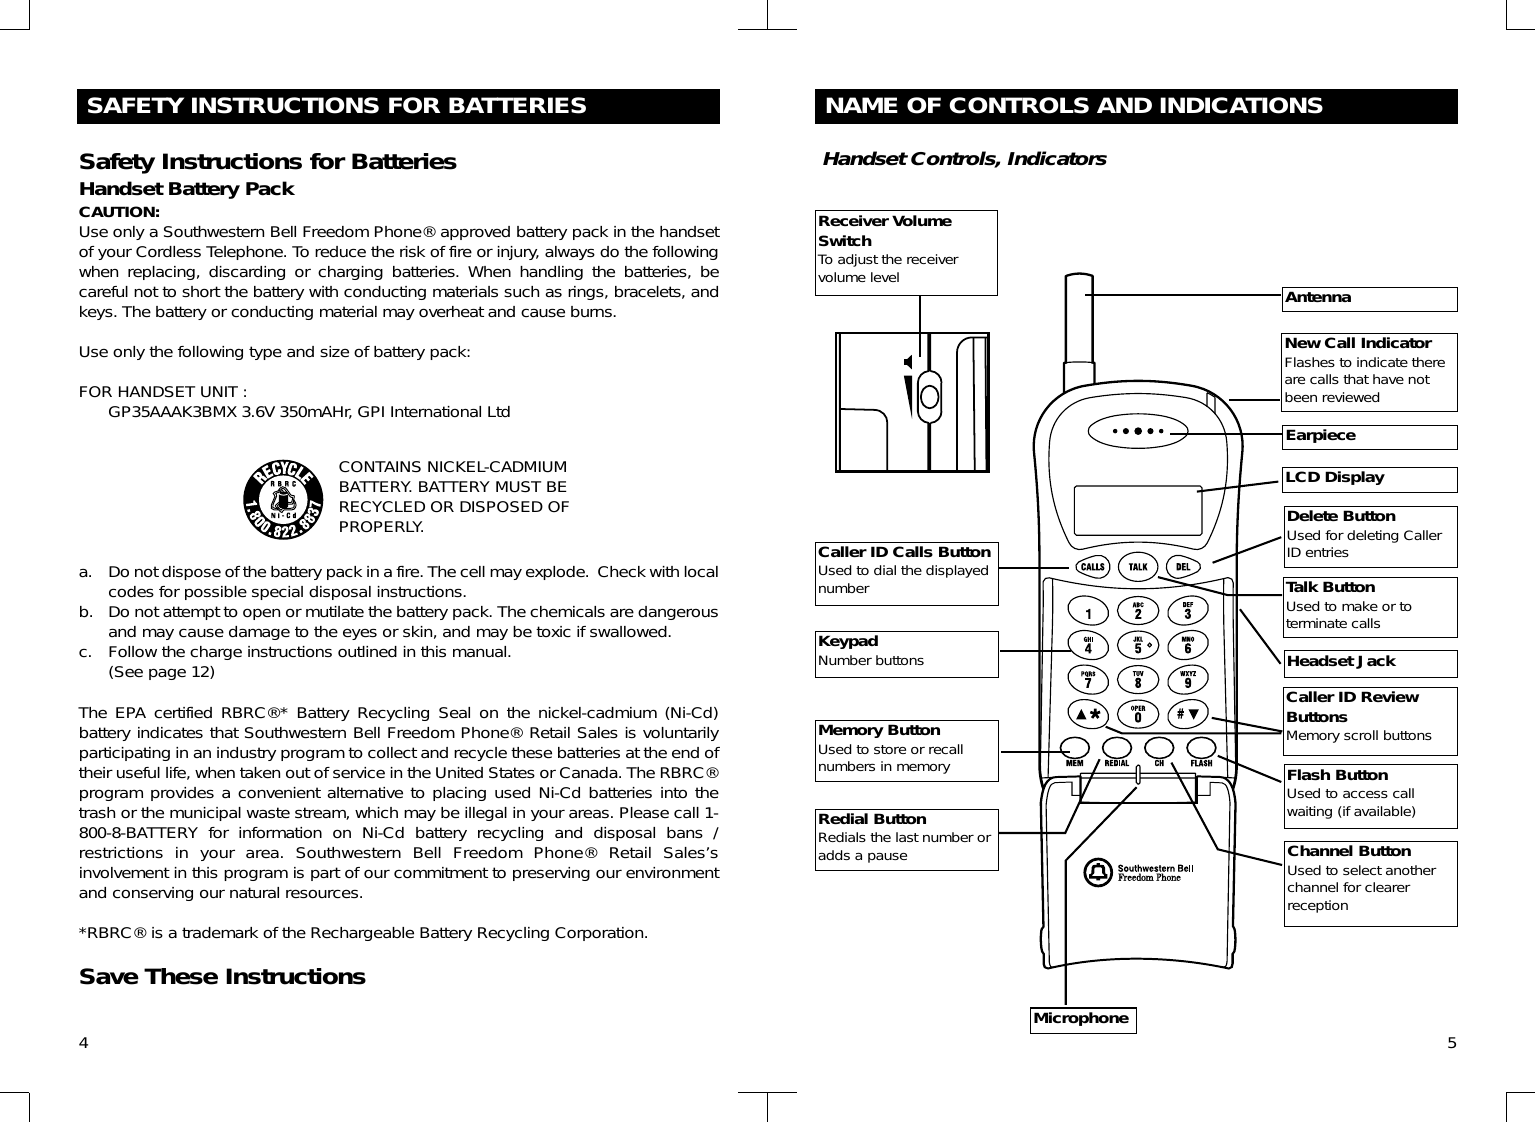 4SAFETY INSTRUCTIONS FOR BATTERIESSafety Instructions for BatteriesHandset Battery PackCAUTION:Use only a Southwestern Bell Freedom Phone® approved battery pack in the handsetof your Cordless Telephone. To reduce the risk of fire or injury, always do the followingwhen replacing, discarding or charging batteries. When handling the batteries, becareful not to short the battery with conducting materials such as rings, bracelets, andkeys. The battery or conducting material may overheat and cause burns.Use only the following type and size of battery pack:FOR HANDSET UNIT :GP35AAAK3BMX 3.6V 350mAHr, GPI International Ltda. Do not dispose of the battery pack in a fire. The cell may explode.  Check with localcodes for possible special disposal instructions.b. Do not attempt to open or mutilate the battery pack. The chemicals are dangerousand may cause damage to the eyes or skin, and may be toxic if swallowed.c. Follow the charge instructions outlined in this manual.(See page 12)The EPA certified RBRC®* Battery Recycling Seal on the nickel-cadmium (Ni-Cd)battery indicates that Southwestern Bell Freedom Phone® Retail Sales is voluntarilyparticipating in an industry program to collect and recycle these batteries at the end oftheir useful life, when taken out of service in the United States or Canada. The RBRC®program provides a convenient alternative to placing used Ni-Cd batteries into thetrash or the municipal waste stream, which may be illegal in your areas. Please call 1-800-8-BATTERY for information on Ni-Cd battery recycling and disposal bans /restrictions in your area. Southwestern Bell Freedom Phone® Retail Sales’sinvolvement in this program is part of our commitment to preserving our environmentand conserving our natural resources.*RBRC® is a trademark of the Rechargeable Battery Recycling Corporation.Save These InstructionsCONTAINS NICKEL-CADMIUMBATTERY. BATTERY MUST BERECYCLED OR DISPOSED OFPROPERLY.5NAME OF CONTROLS AND INDICATIONSHandset Controls, IndicatorsAntennaEarpieceLCD DisplayNew Call IndicatorFlashes to indicate thereare calls that have notbeen reviewedMemory ButtonUsed to store or recallnumbers in memoryDelete ButtonUsed for deleting CallerID entriesRedial ButtonRedials the last number oradds a pauseFlash ButtonUsed to access callwaiting (if available)MicrophoneReceiver VolumeSwitchTo adjust the receivervolume levelCaller ID ReviewButtonsMemory scroll buttonsCaller ID Calls ButtonUsed to dial the displayednumber Talk ButtonUsed to make or toterminate callsKeypadNumber buttonsChannel ButtonUsed to select anotherchannel for clearerreceptionHeadset Jack